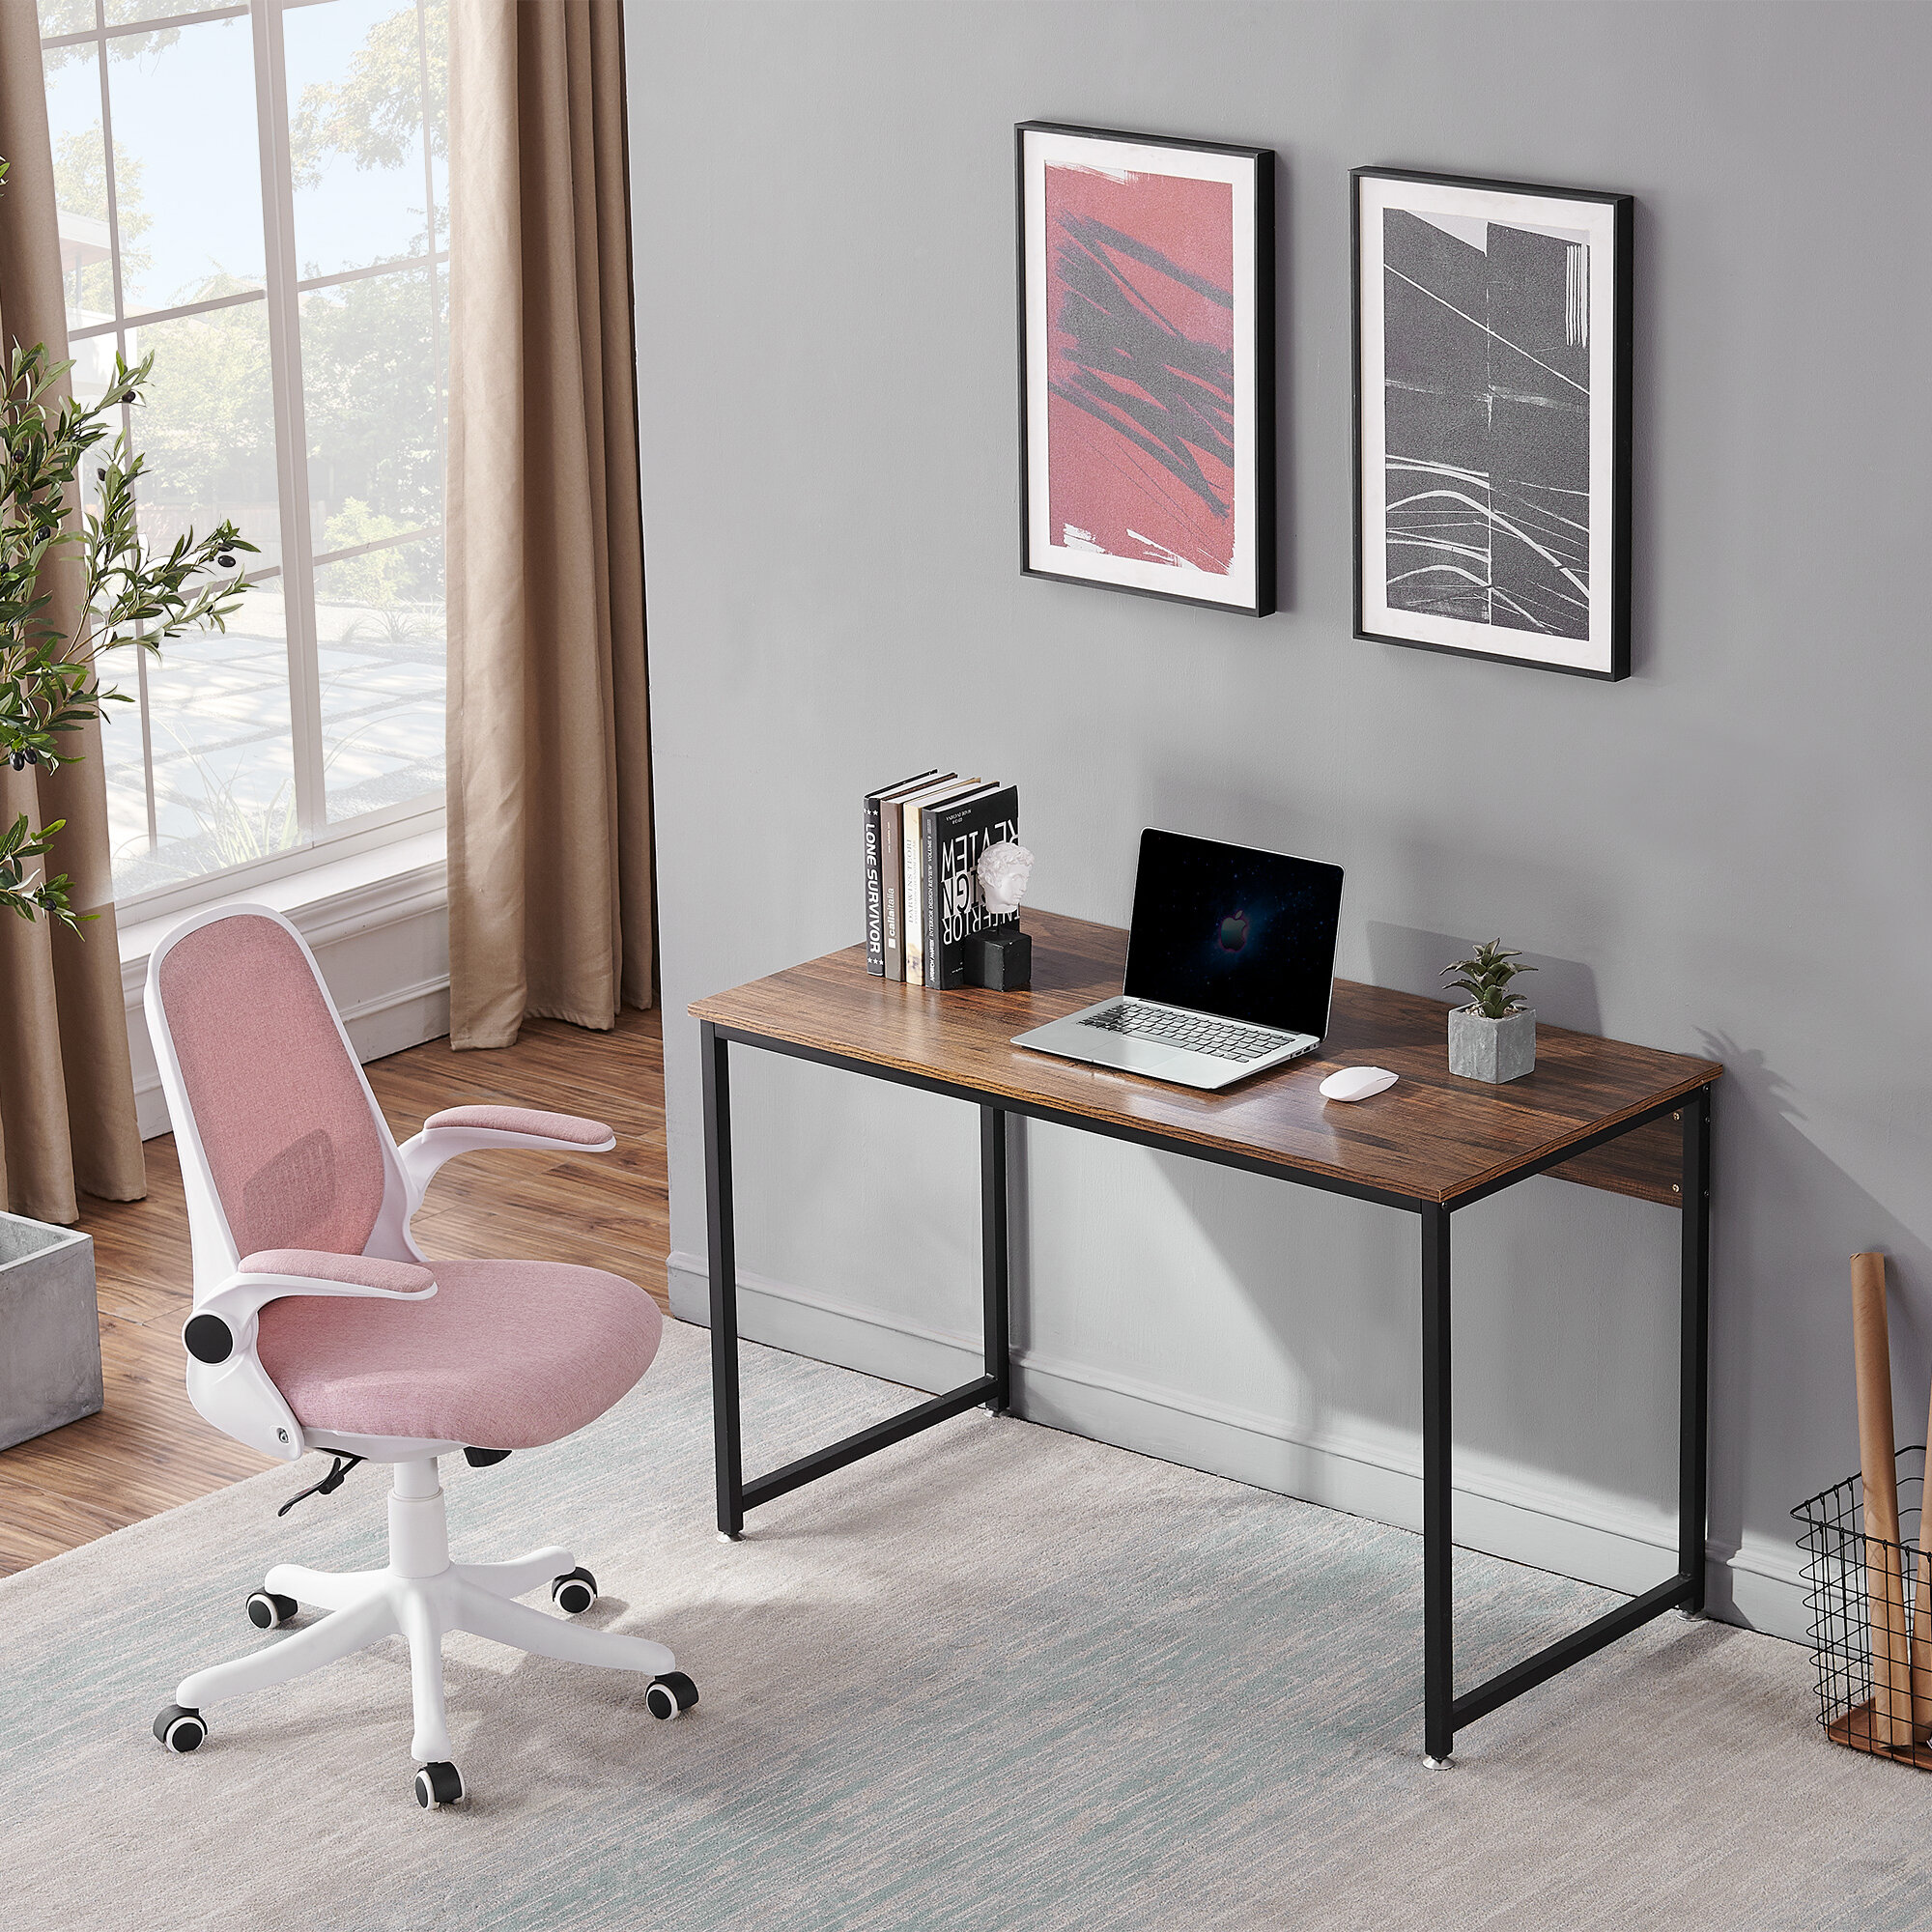 pink desk and chair set